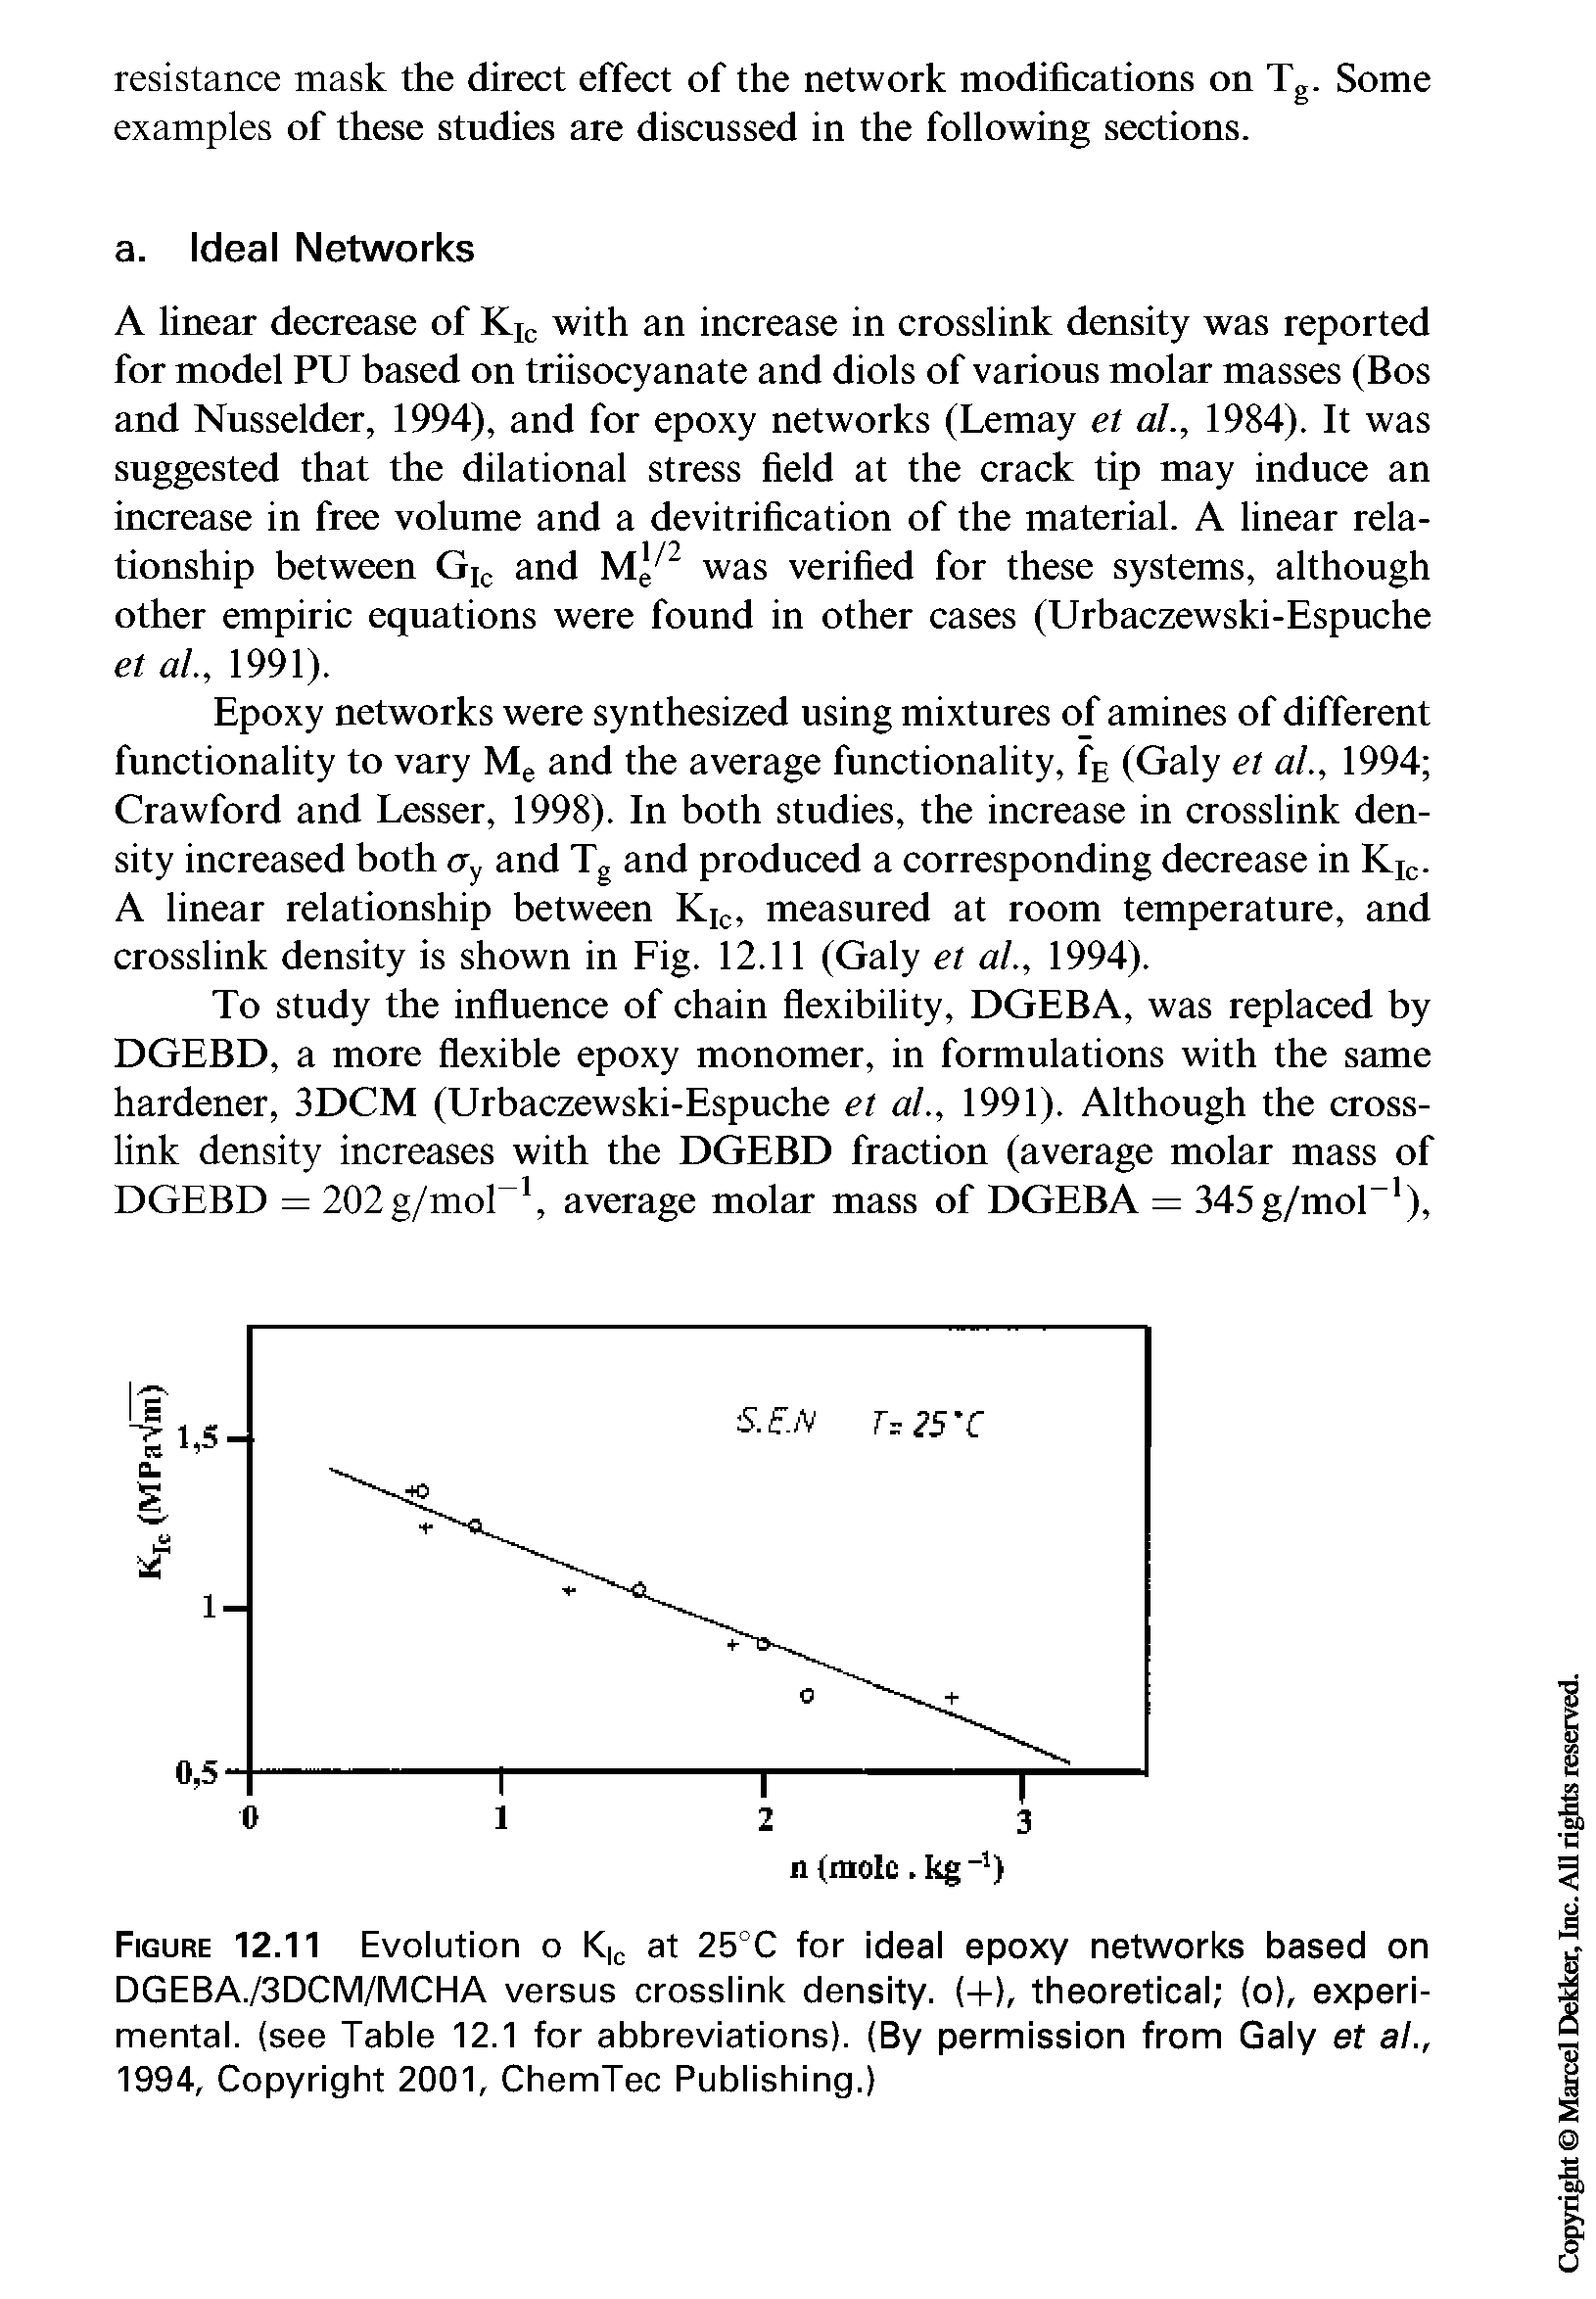 Figure 12.11 Evolution o K C at 25°C for ideal epoxy networks based on DGEBA./3DCM/MCHA versus crosslink density. (+), theoretical (o), experimental. (see Table 12.1 for abbreviations). (By permission from Galy et al., 1994, Copyright 2001, ChemTec Publishing.)...